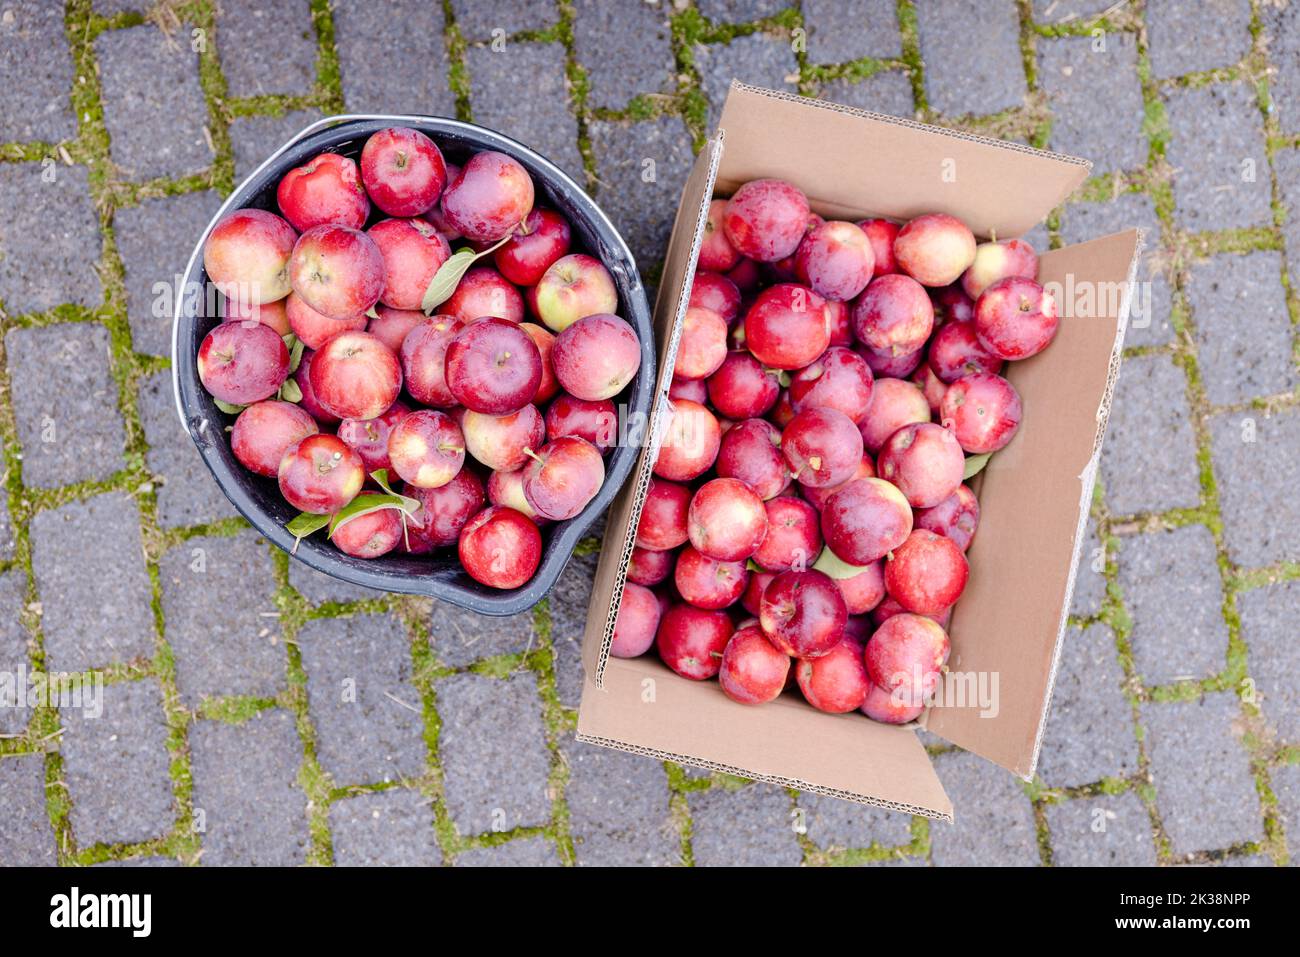 Two crates of freshly harvested apples Stock Photo